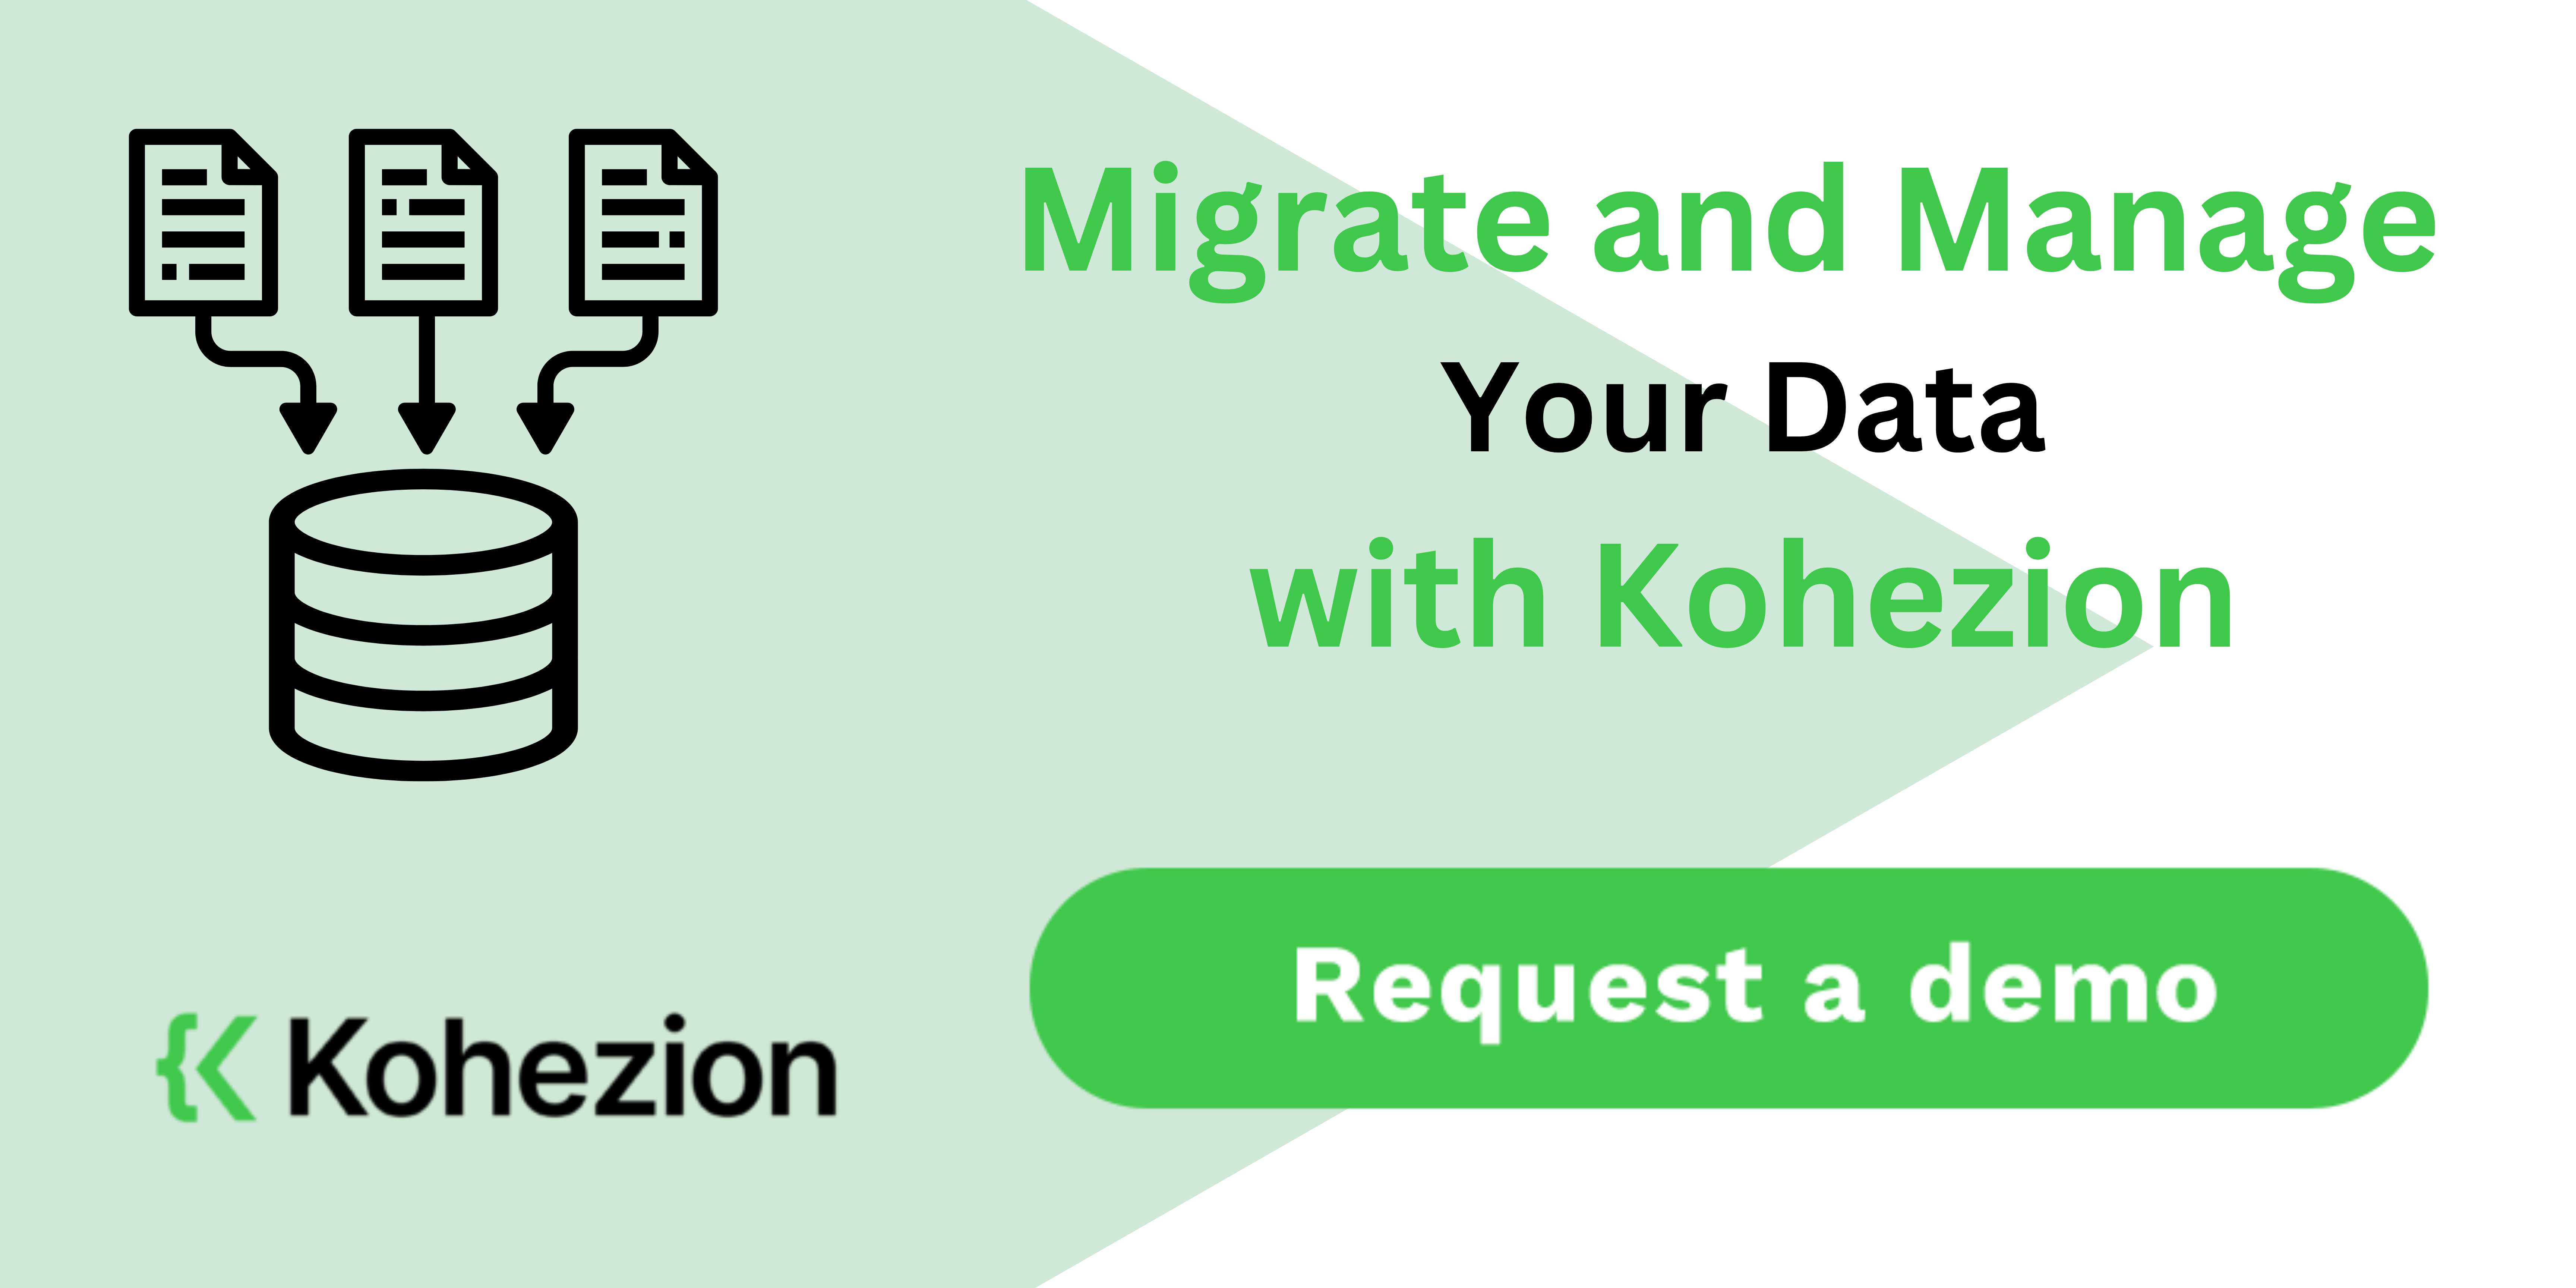 migrate and manage your data with kohezion